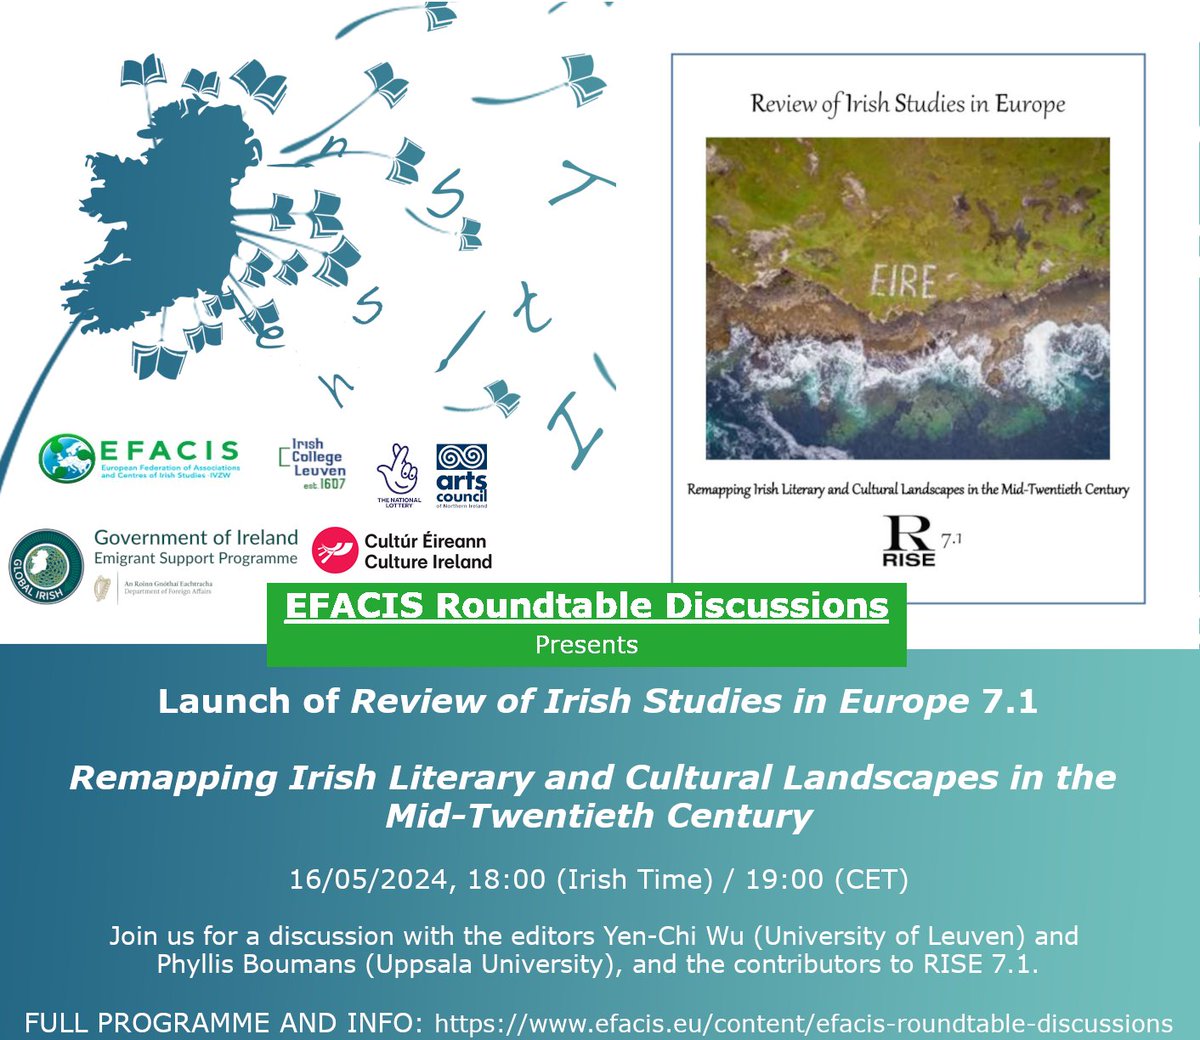 Join the editors and contributors on 16 may at 7pm CET for the online #launch of Review of Irish Studies in Europe 7.1! Register for this launch at efacis.eu/content/efacis… #irishstudies